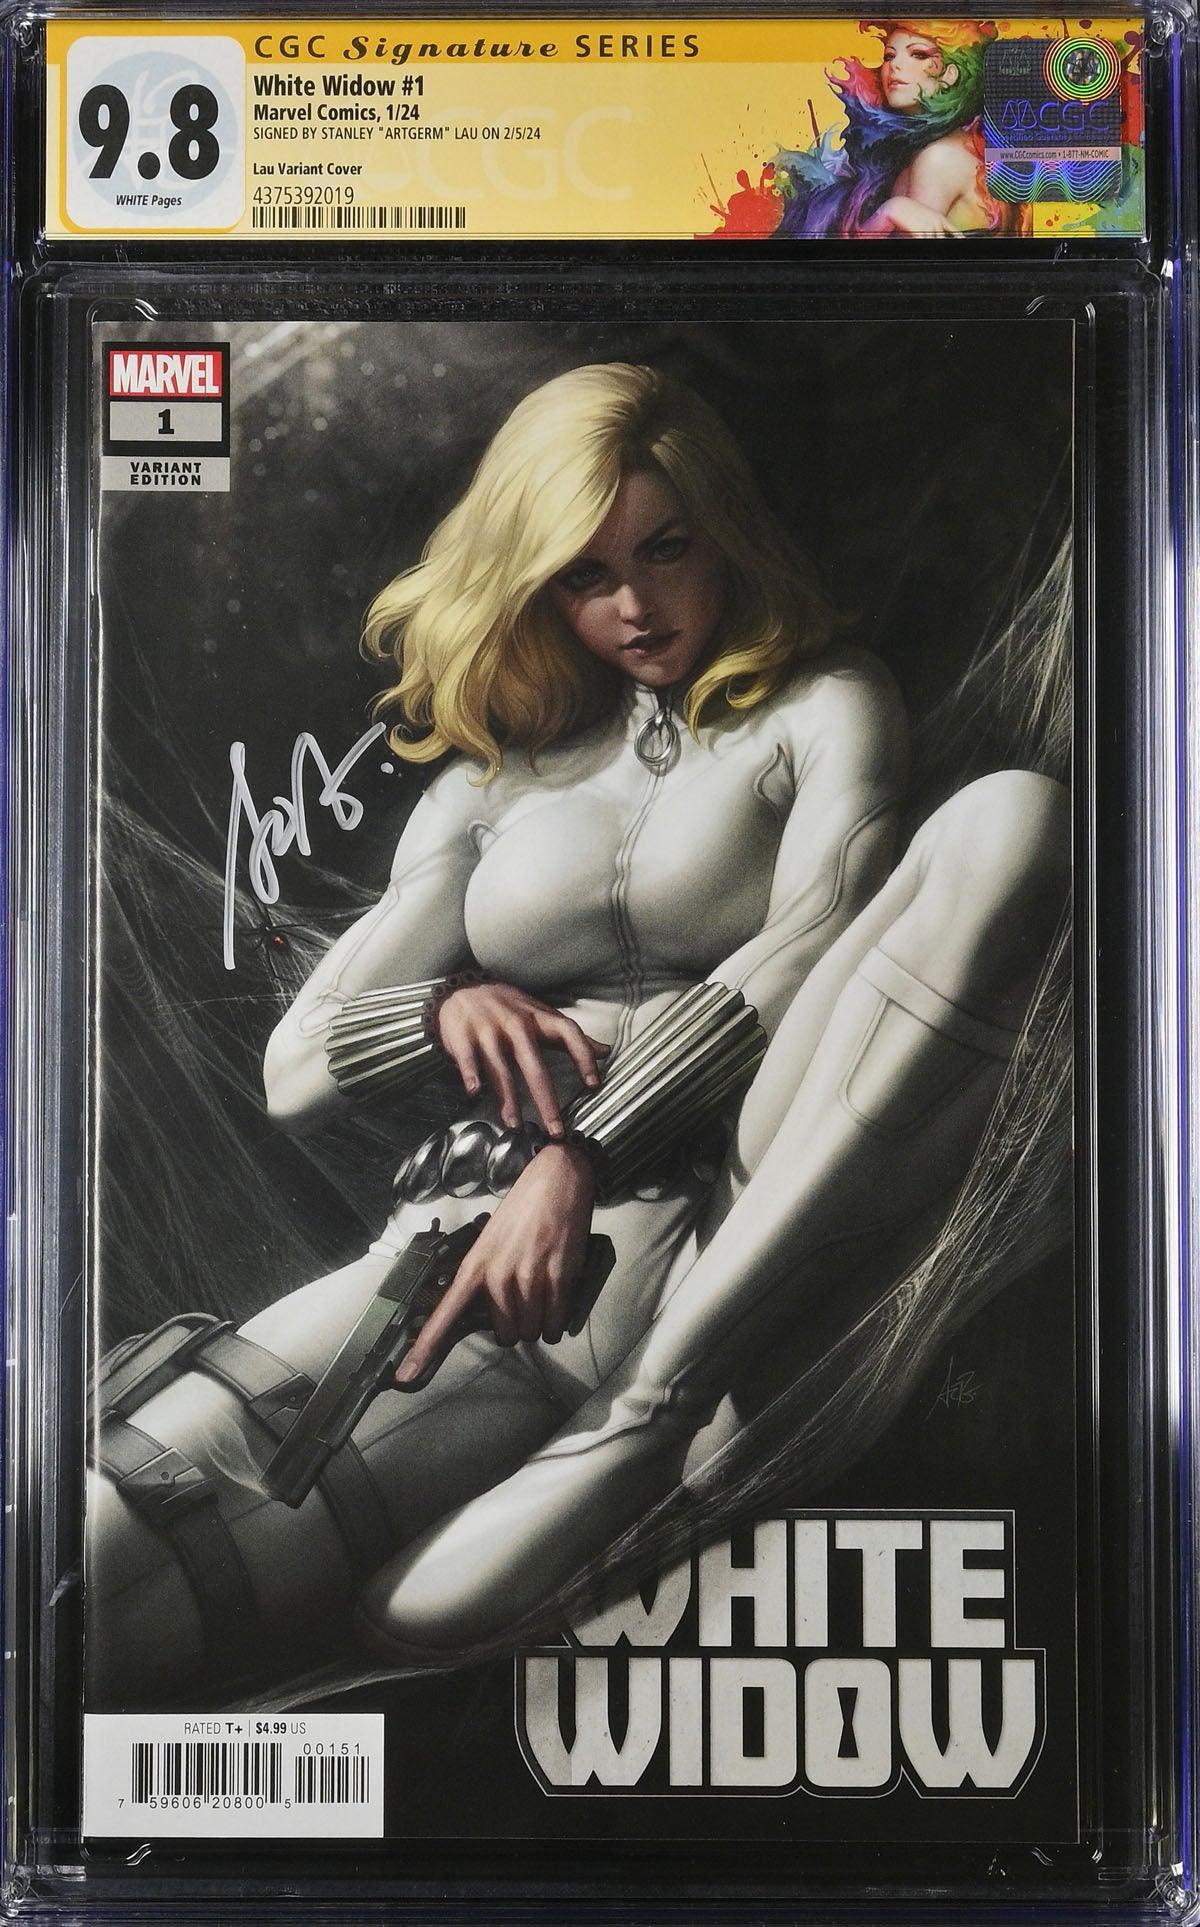 CGC WHITE WIDOW #1 LAU VARIANT (9.8) SIGNATURE SERIES - SIGNED BY STANLEY "ARTGERM" LAU - Kings Comics